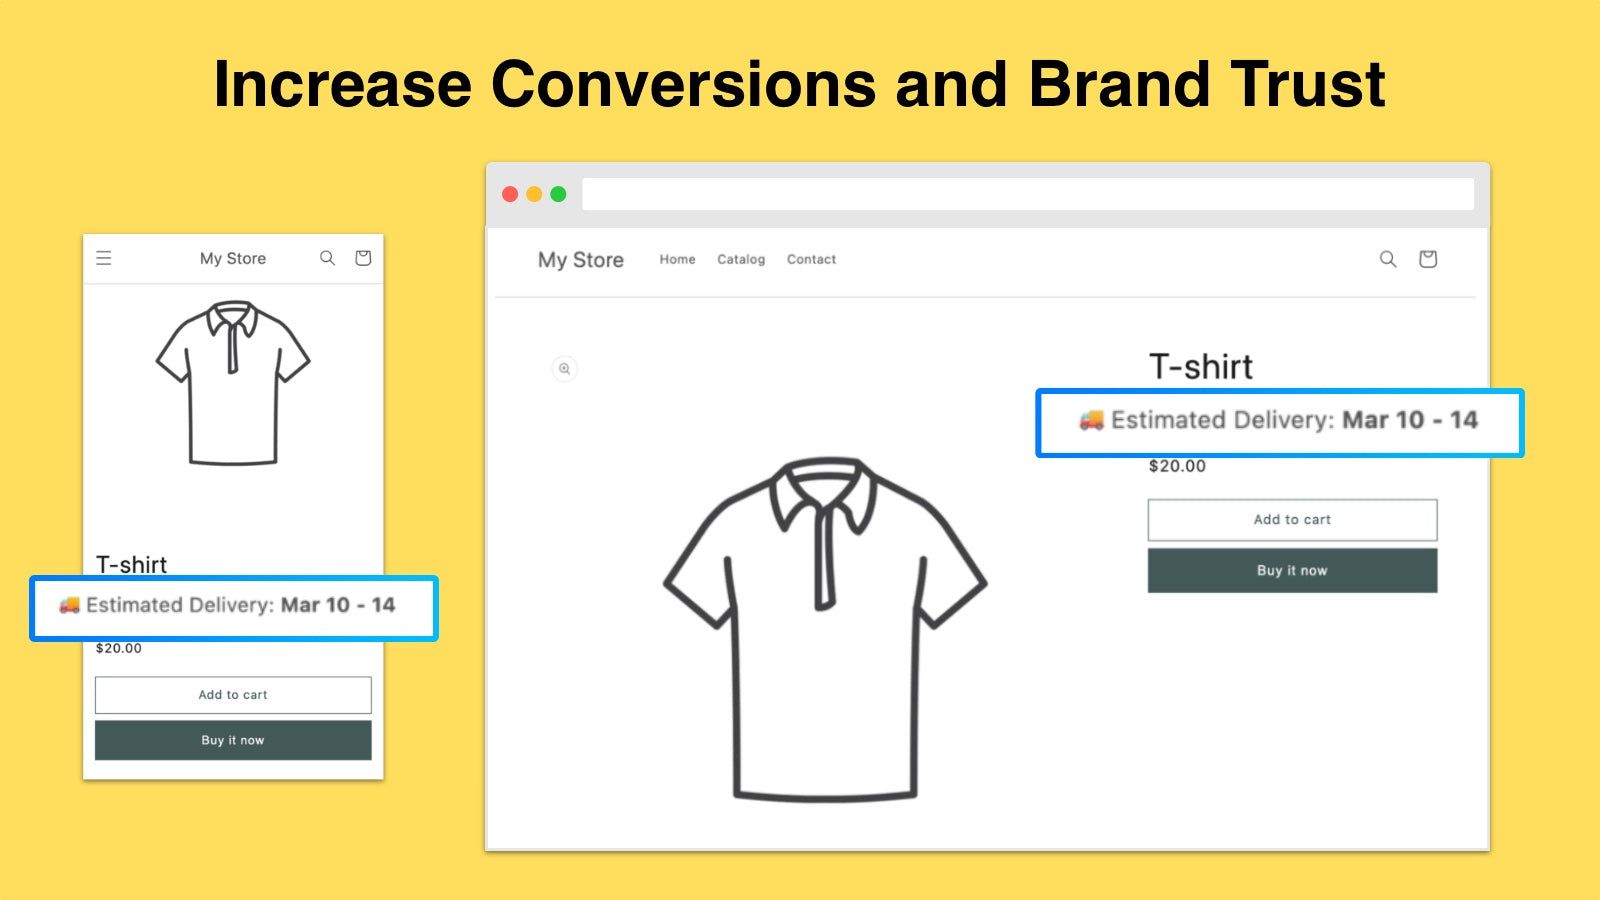 Increase Conversions and Brand Trust